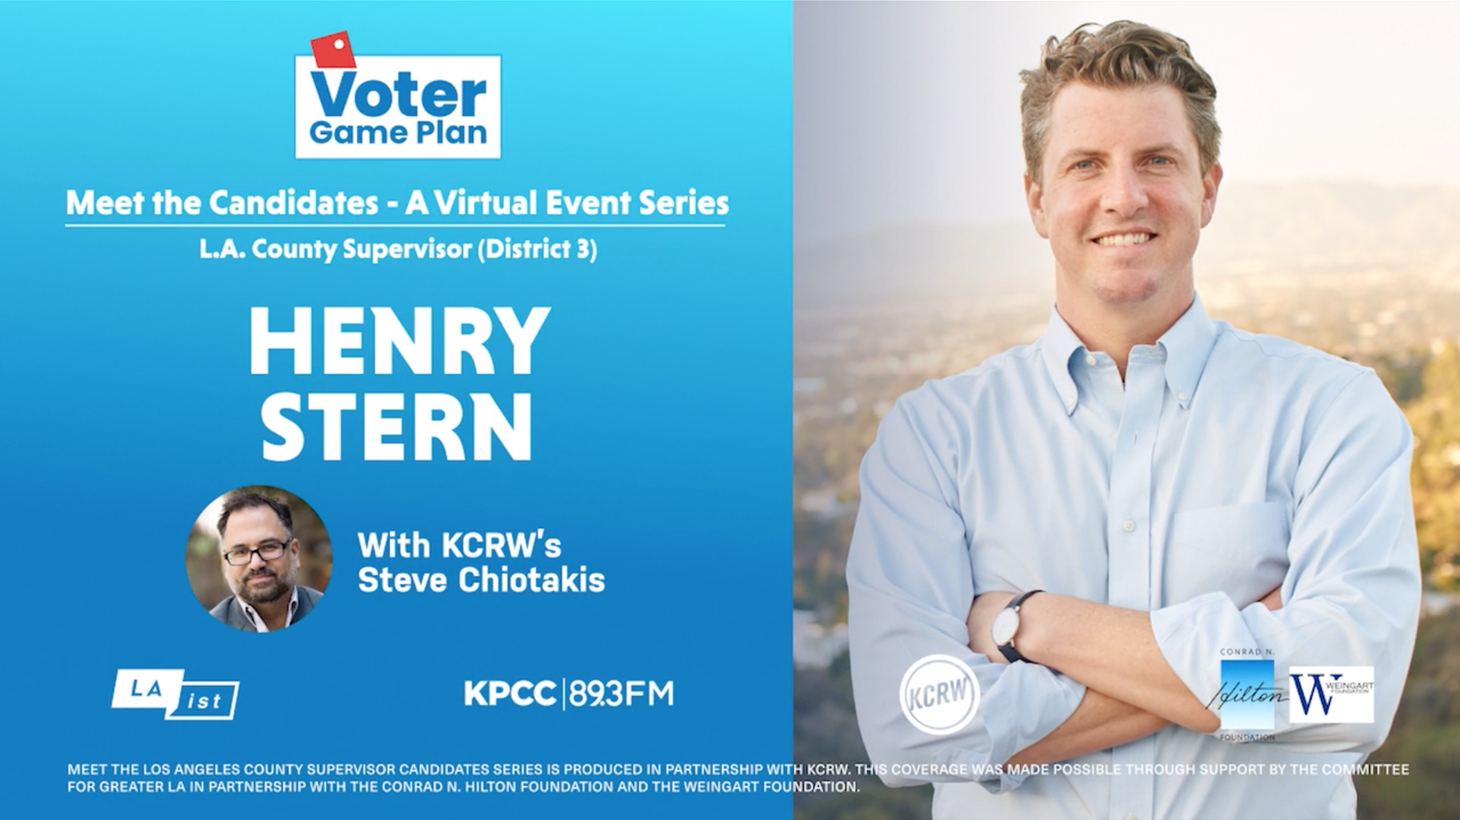 Henry Stern, one of three leading candidates seeking to represent the 3rd District of the LA County Board of Supervisors, speaks with KCRW and KPCC/LAist.